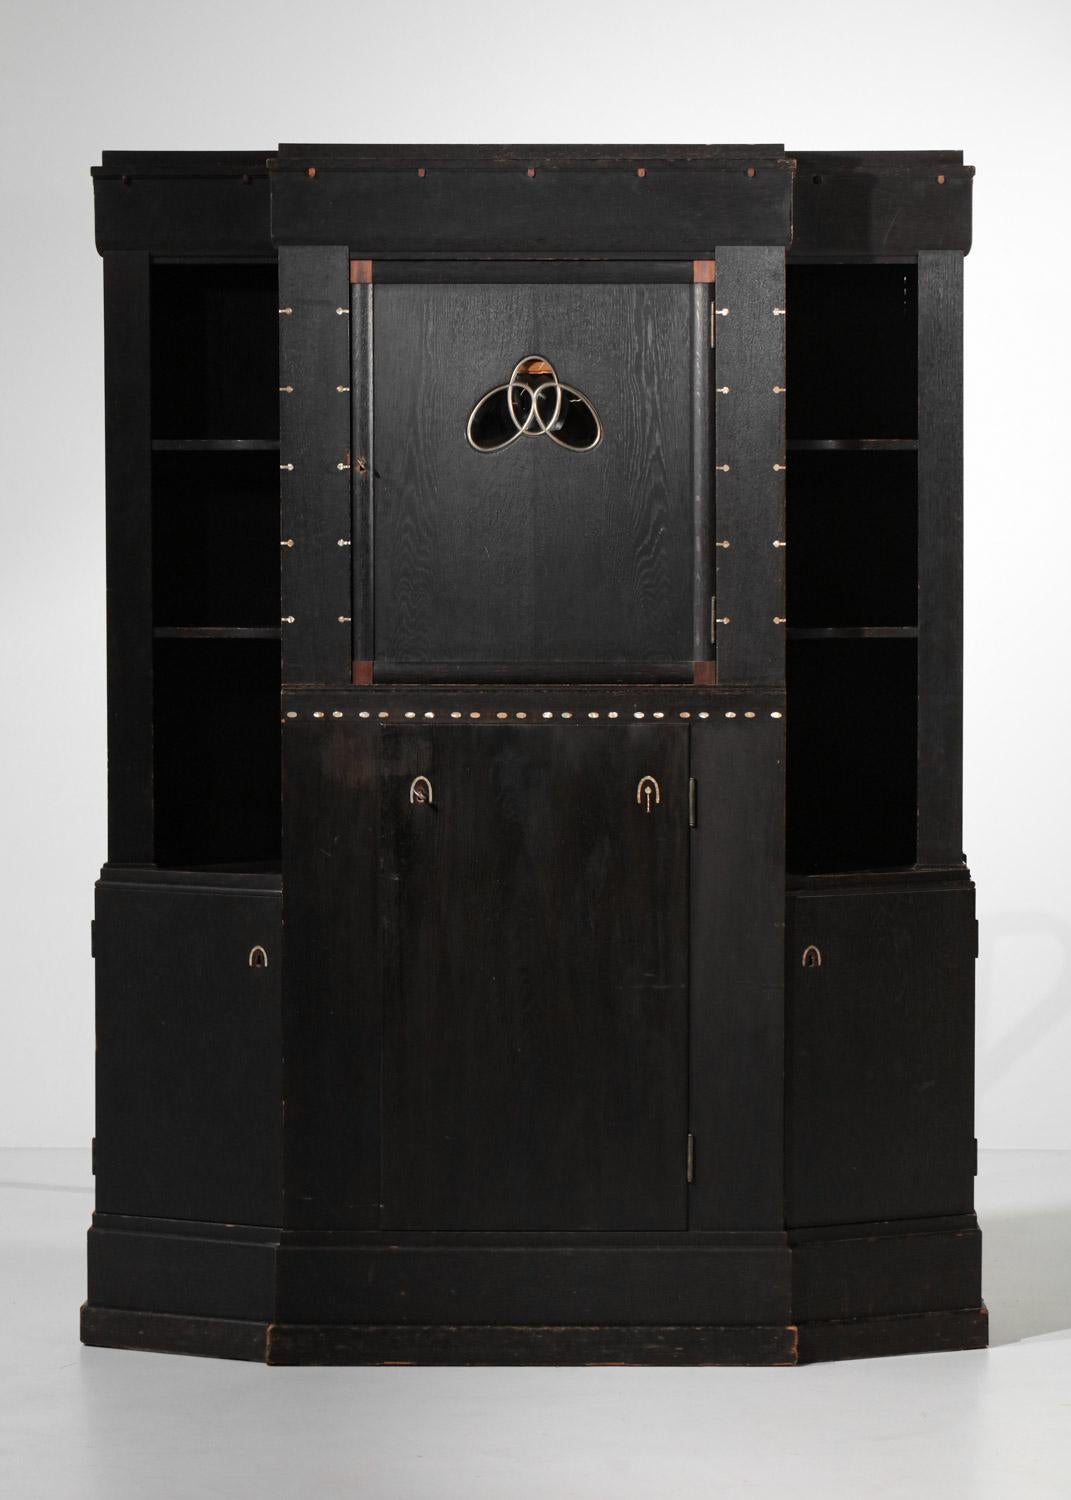 Arts and Crafts Art craft furniture from the 20s in blackened oak attributed to Josef hoffmann  For Sale